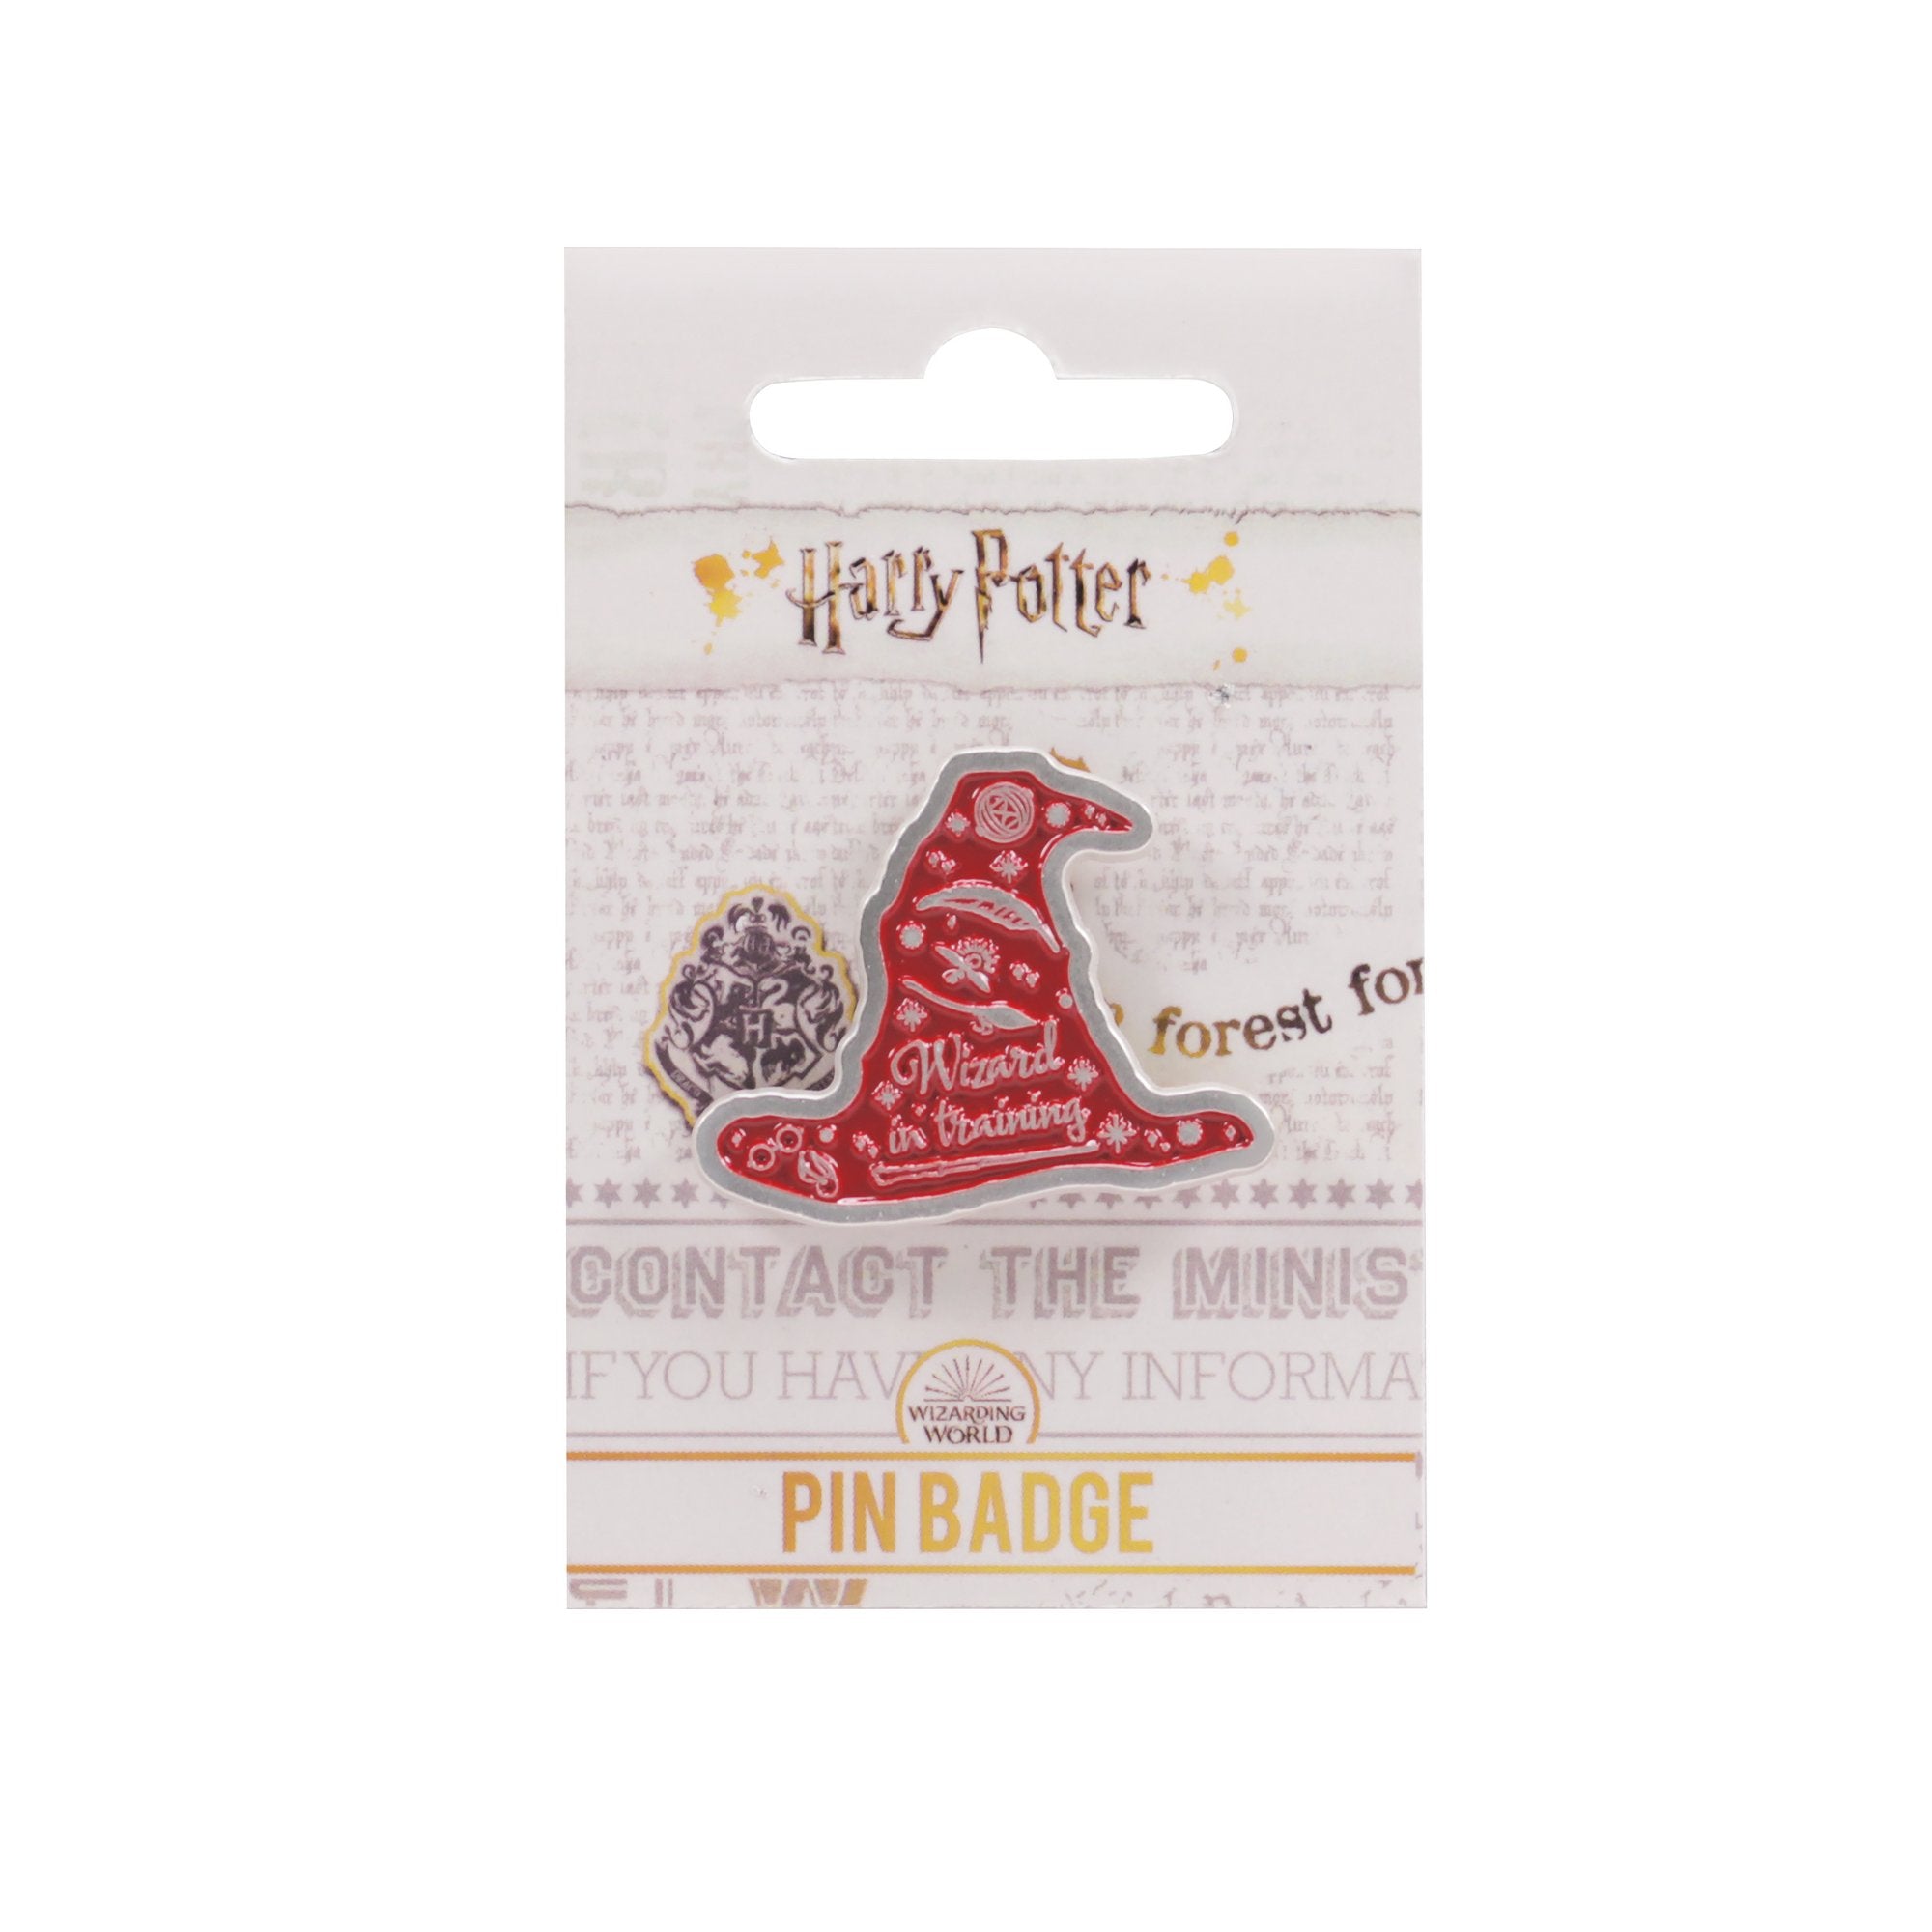 Harry Potter Pin Badge - Wizard in Training